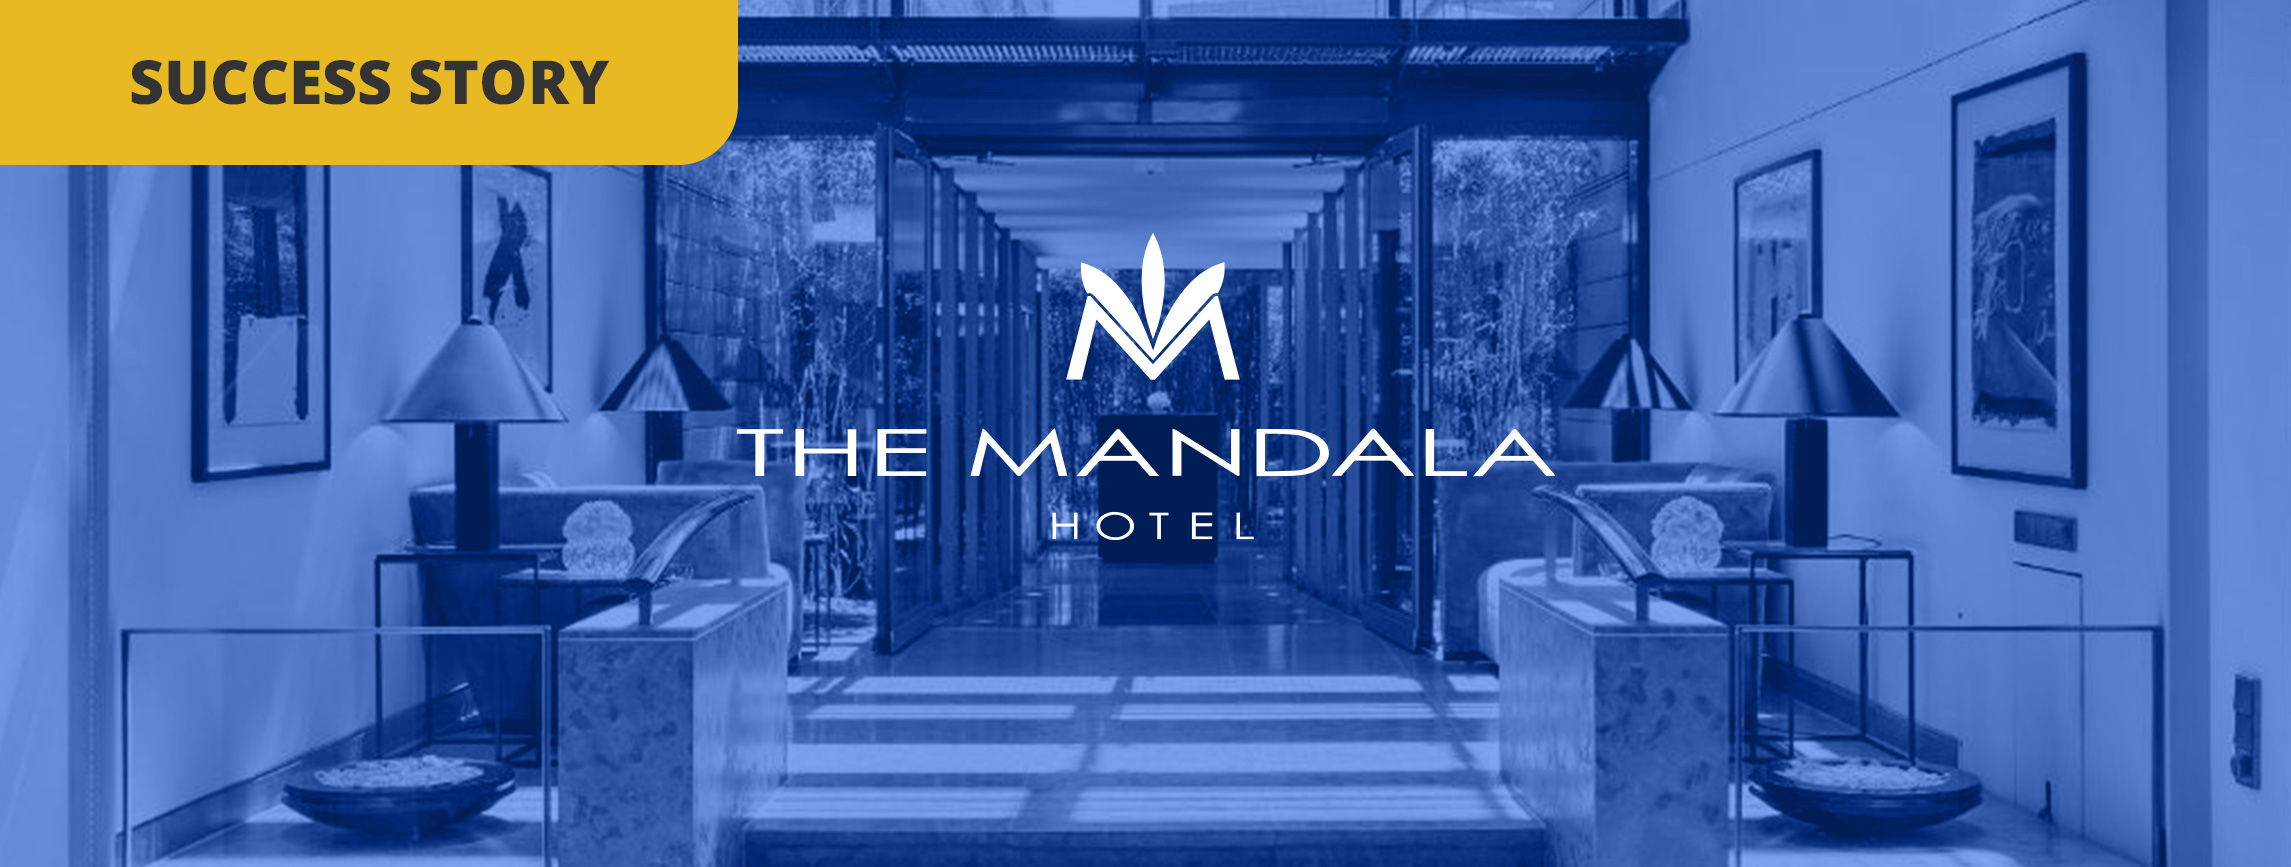 How The Mandala Hotel leverages the instant survey to improv...